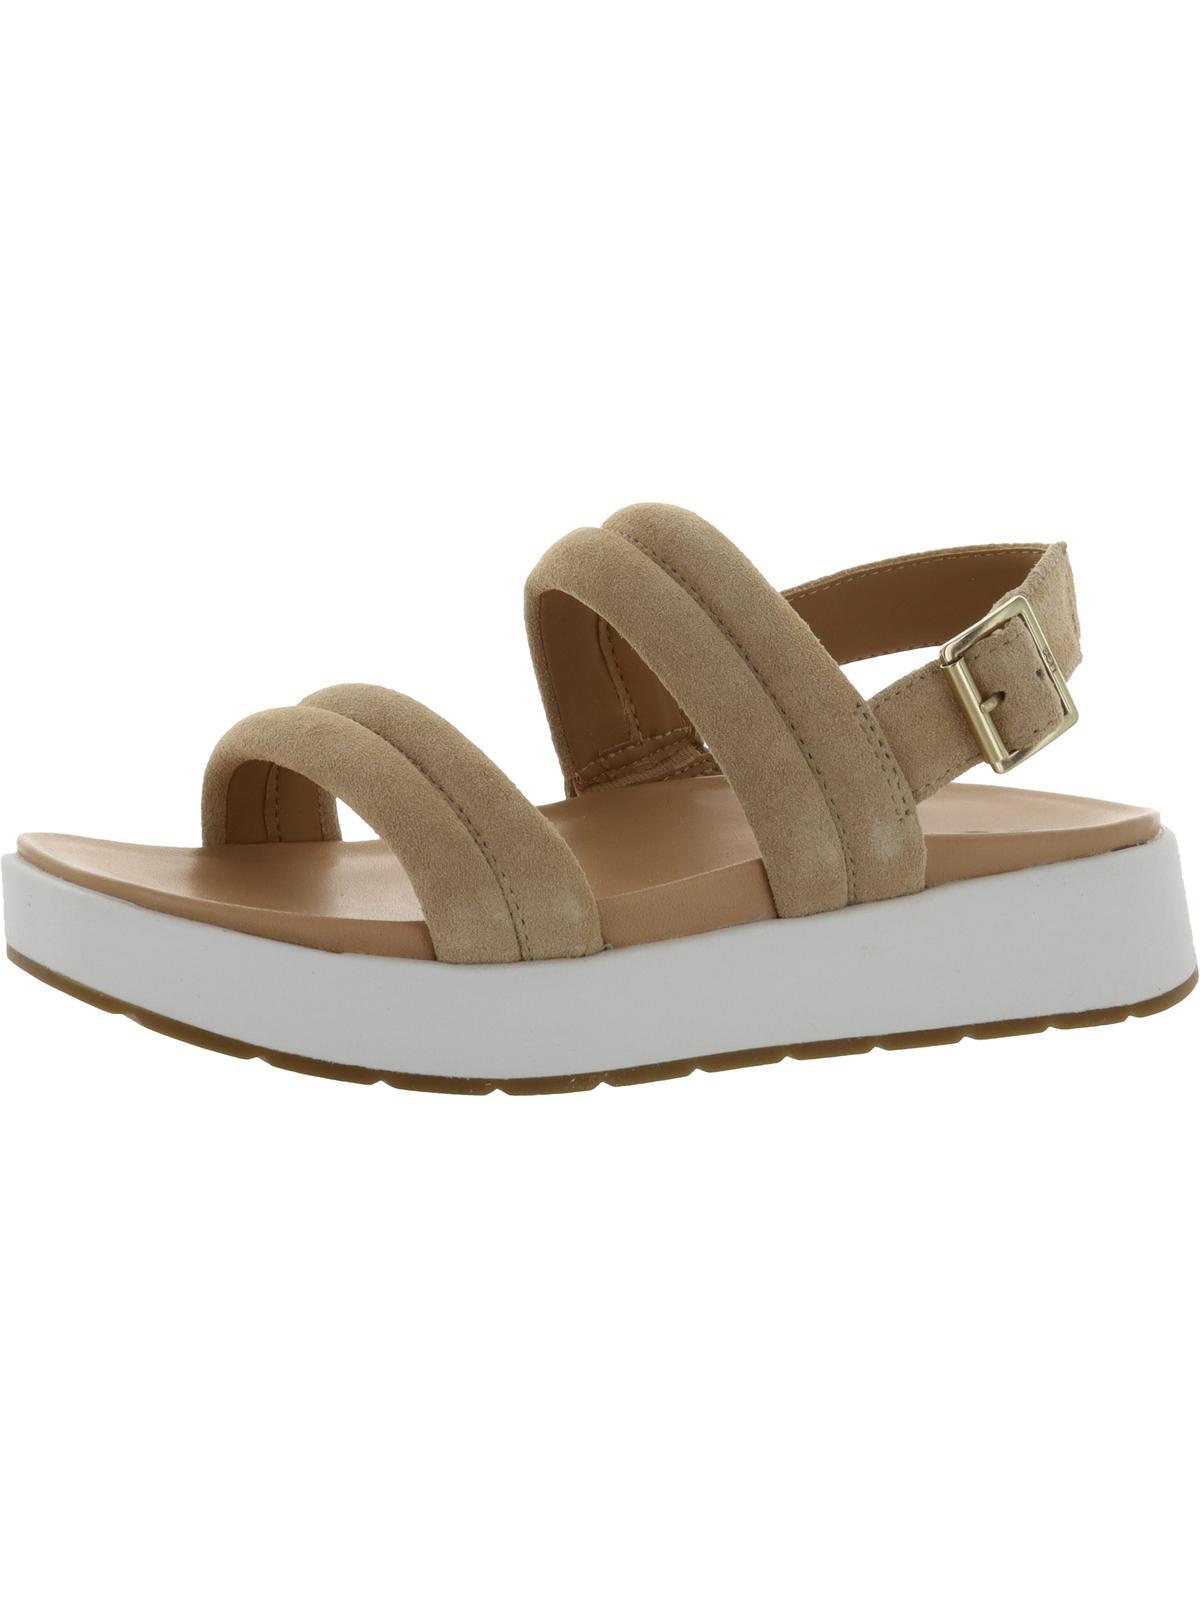 UGG Lynnden Suede Square Toe Wedge Sandals | Lyst